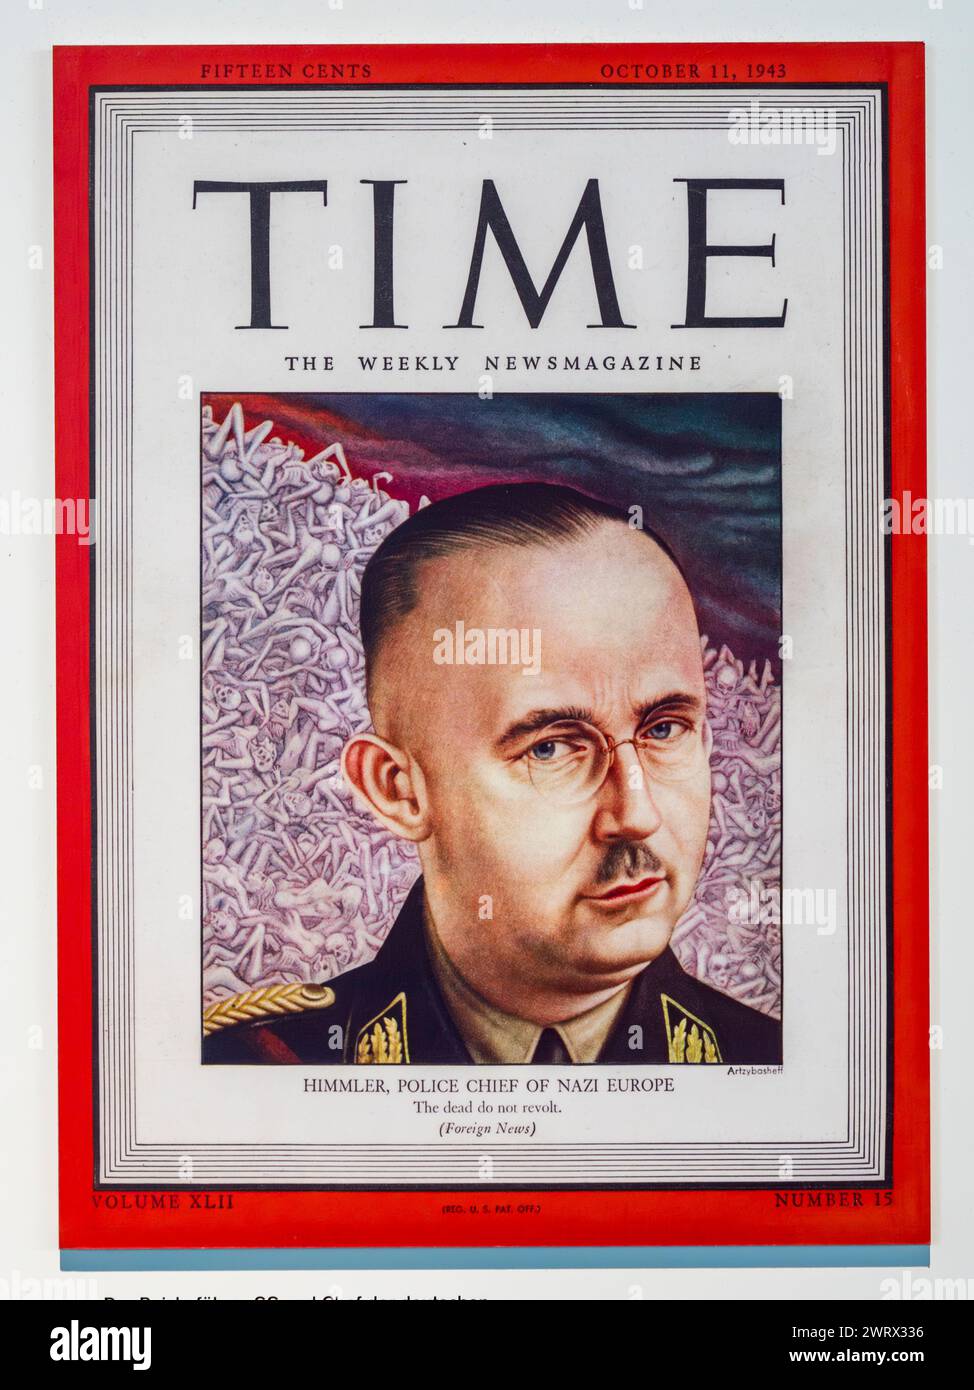 Front cover of the Time magazine featuring Heinrich Himmler (11th October 1943) on display in the Topography of Terror, Berlin, Germany, Stock Photo